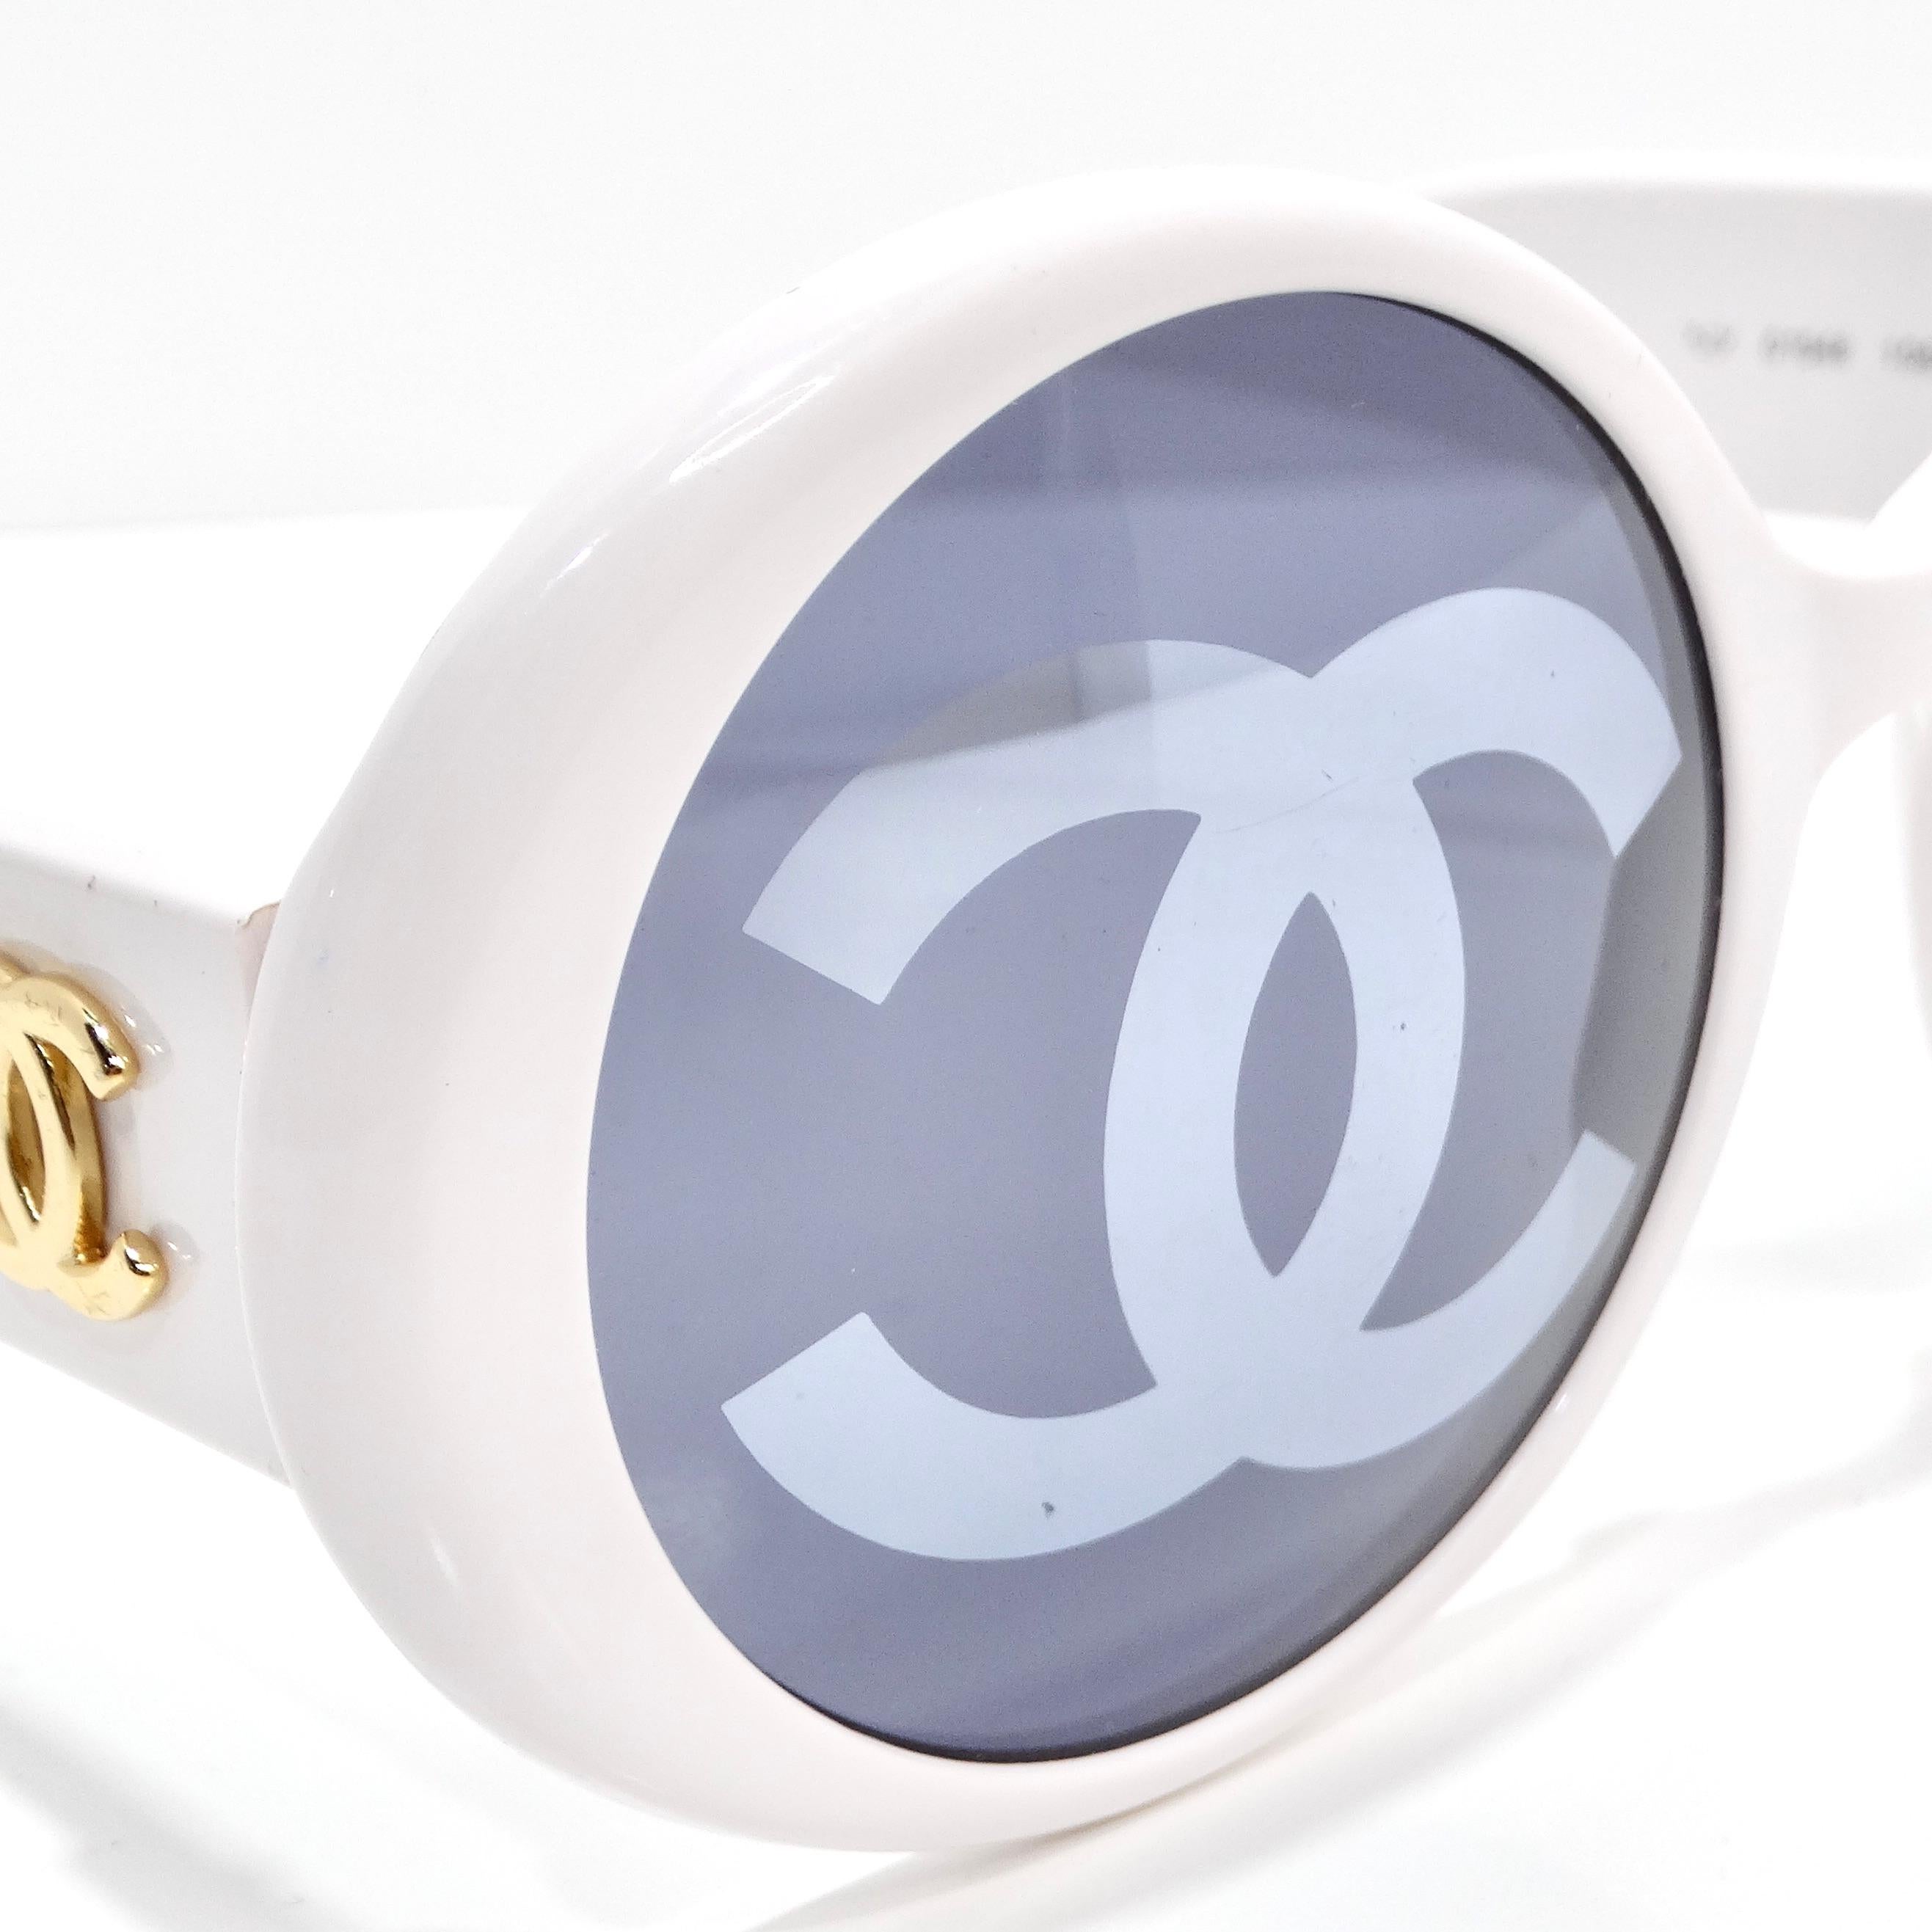 Indulge in a piece of fashion history with the Chanel 1993 White CC Logo Round Lens Sunglasses, a rare and coveted find from Chanel's iconic 1993 runway show. These show-stopping sunglasses boast round lenses that exude timeless elegance, while the